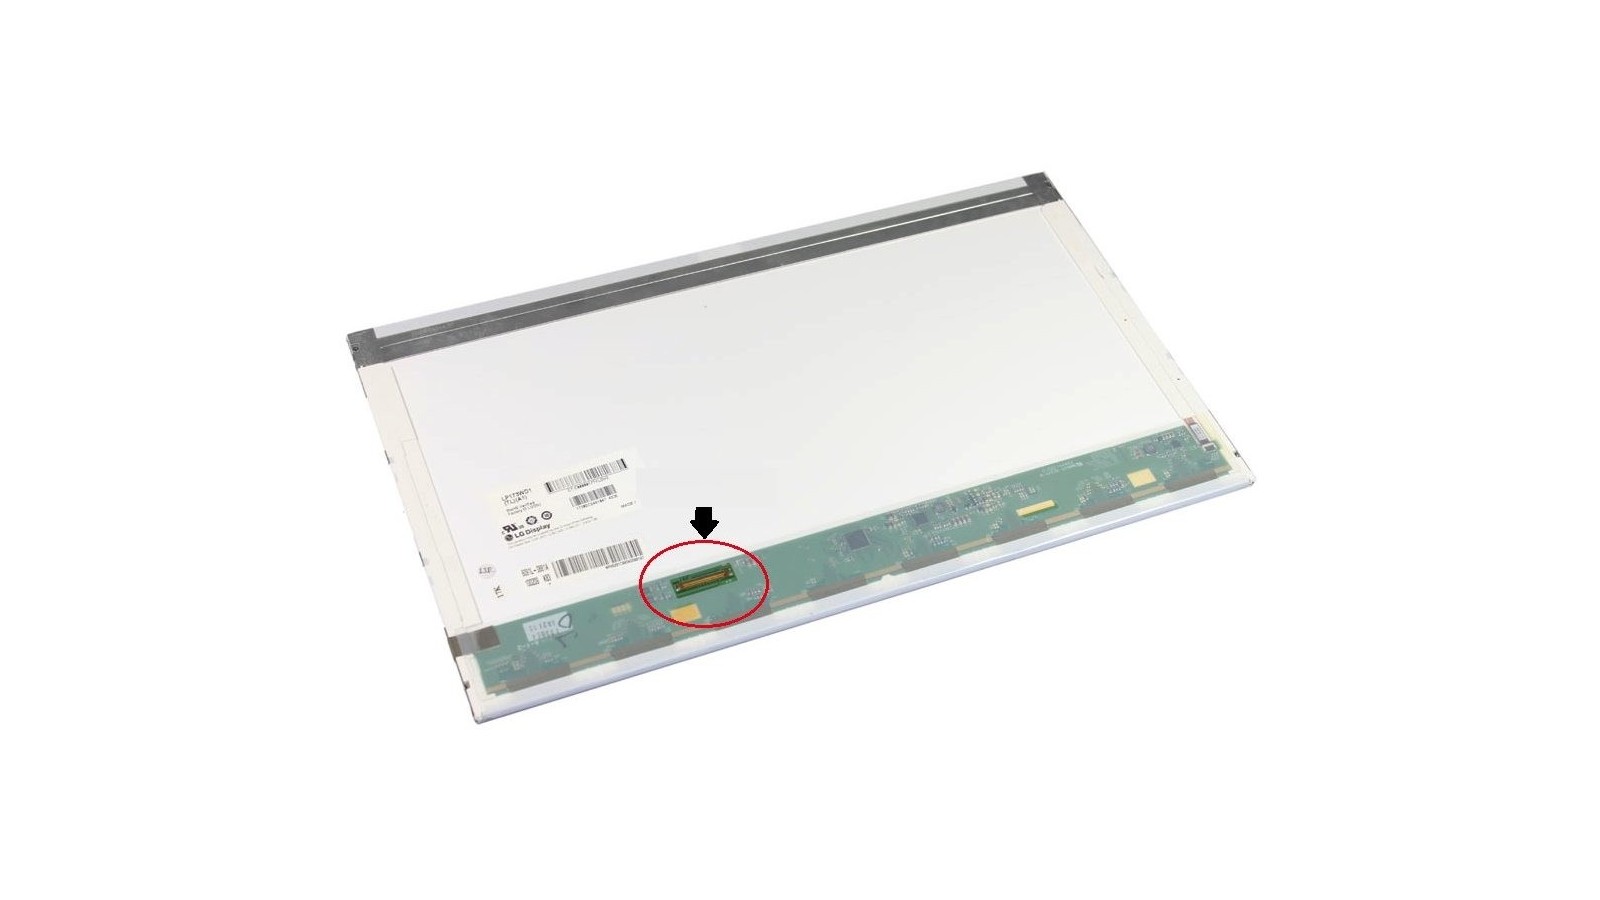 Display Lcd Schermo 17,3 Led compatibile con Packard Bell Easynote LX-J0-110it